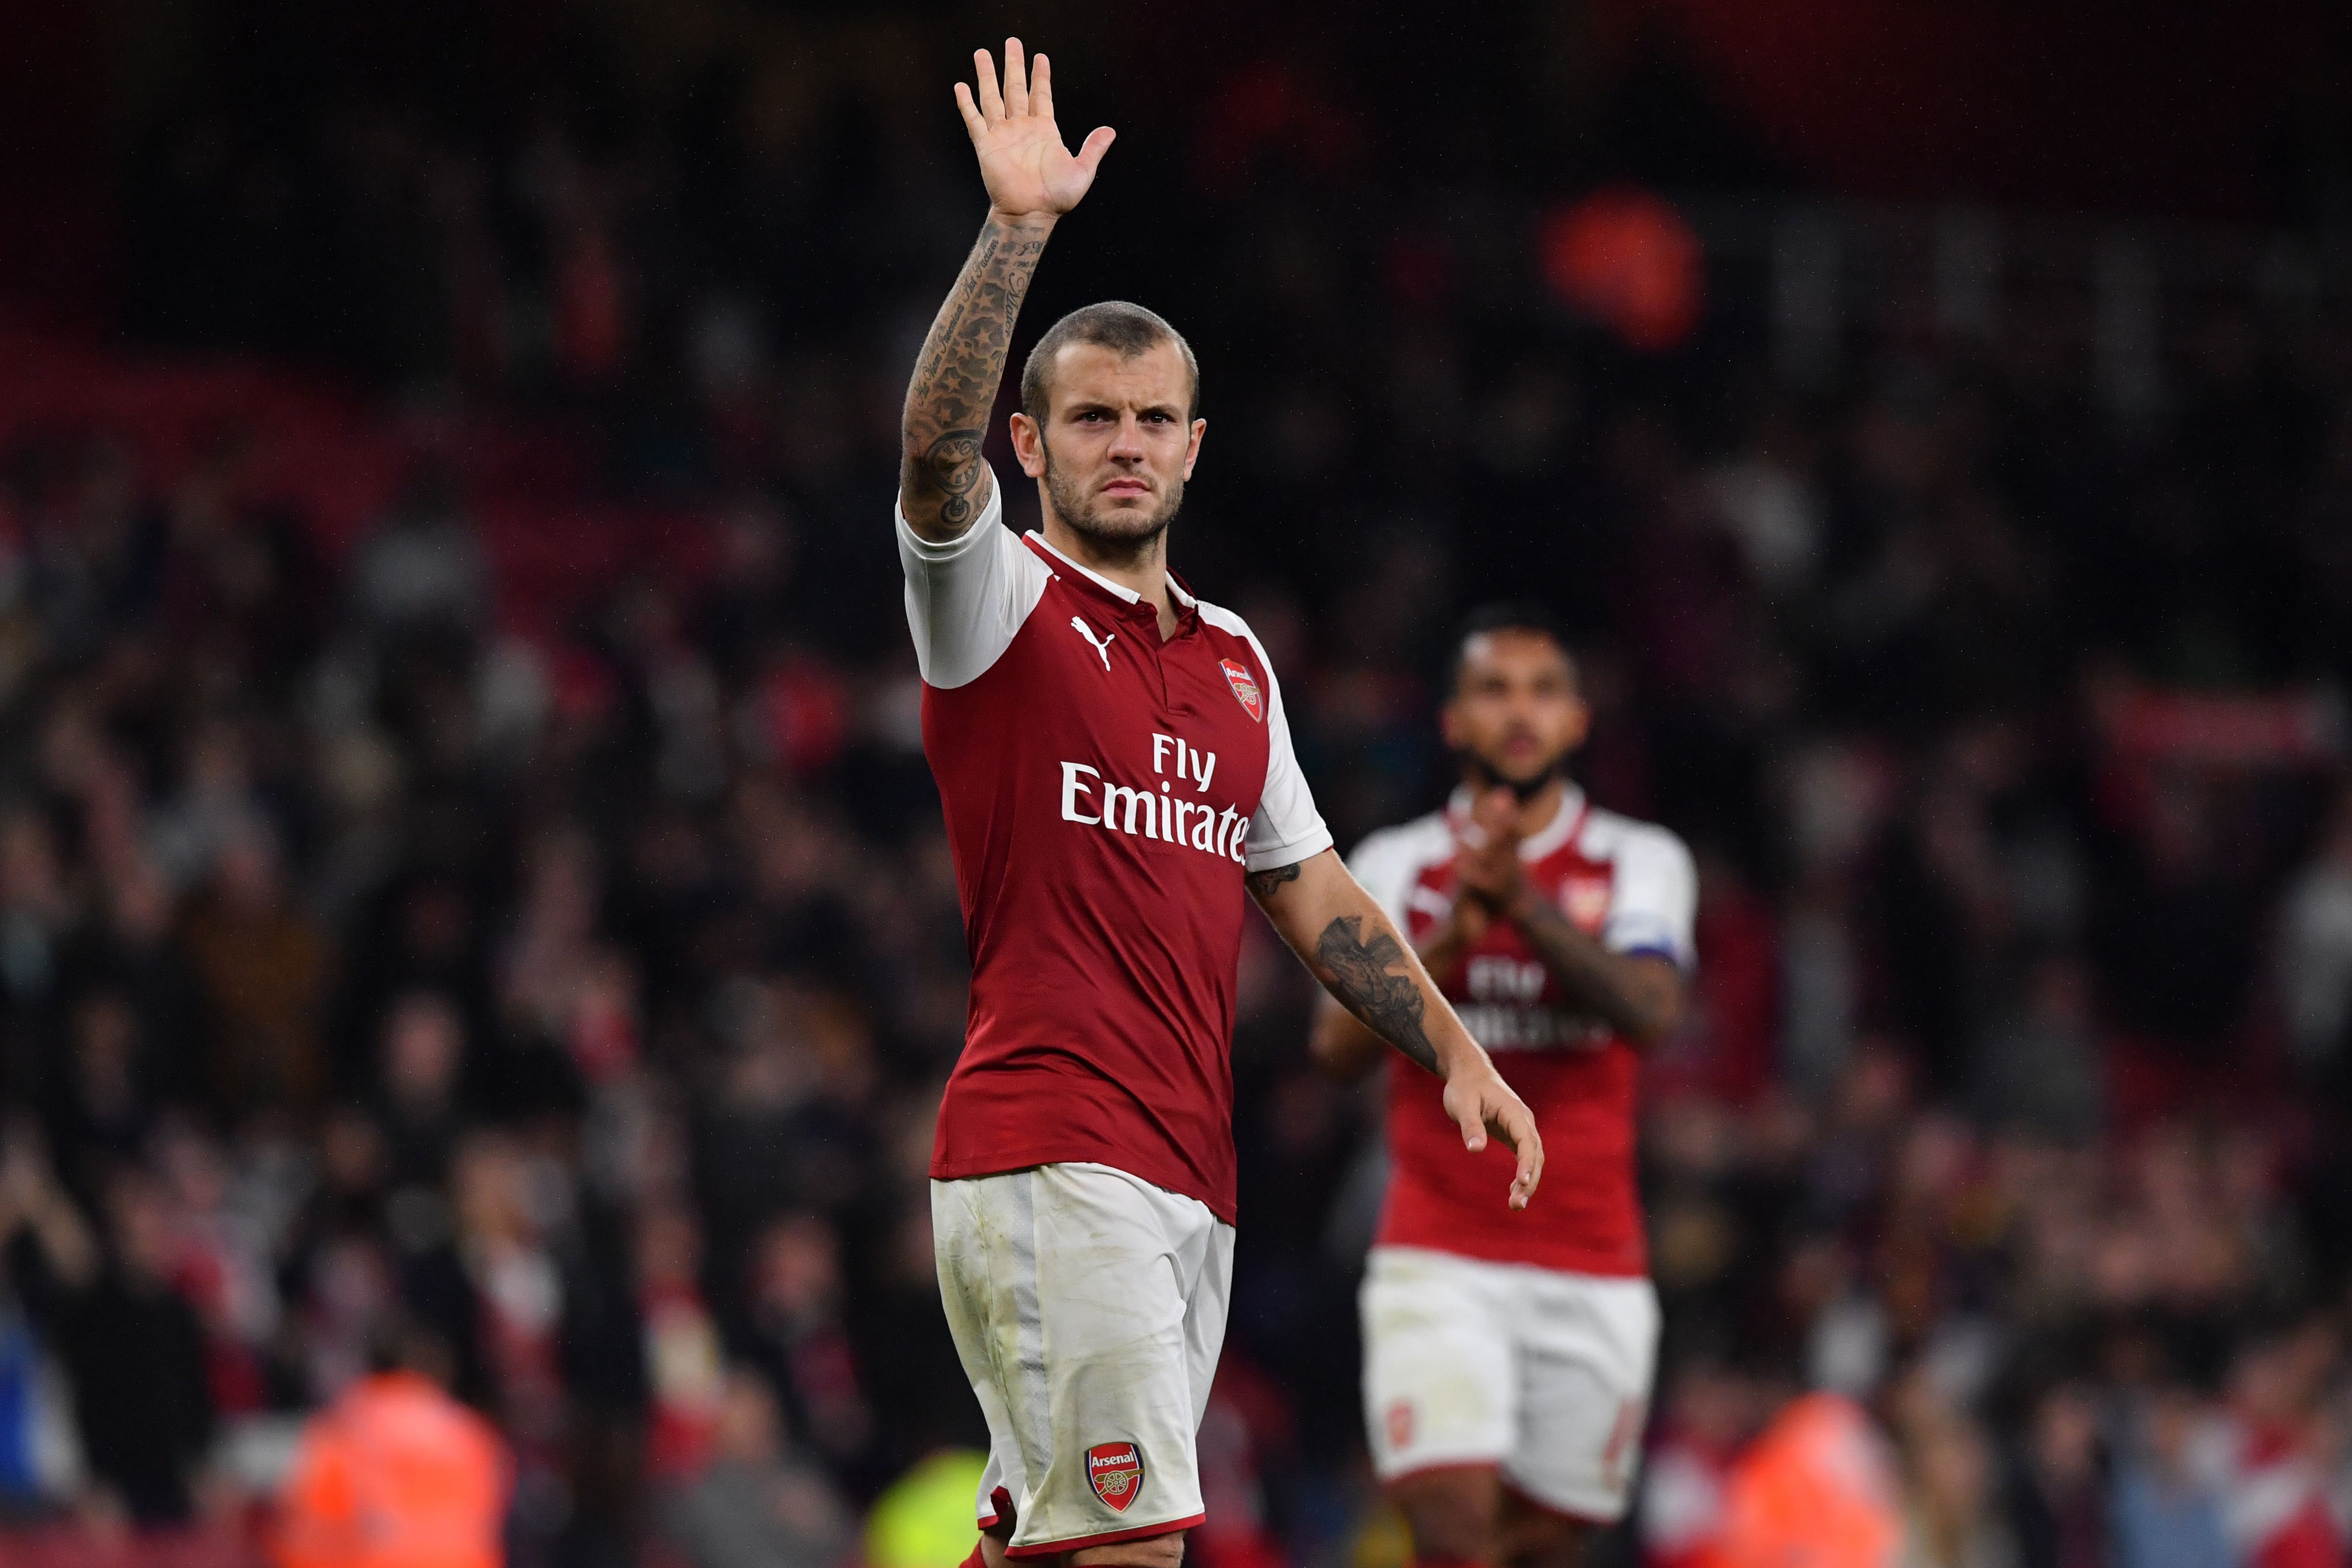 Arsenal's English midfielder Jack Wilshere gestures to supporters on the pitch after the English League Cup fourth round football match between Arsenal and Norwich City at The Emirates Stadium in London on October 24, 2017.
Arsenal won the game 2-1 after extra time after the game finished 1-1. / AFP PHOTO / Ben STANSALL / RESTRICTED TO EDITORIAL USE. No use with unauthorized audio, video, data, fixture lists, club/league logos or 'live' services. Online in-match use limited to 75 images, no video emulation. No use in betting, games or single club/league/player publications.  /         (Photo credit should read BEN STANSALL/AFP/Getty Images)